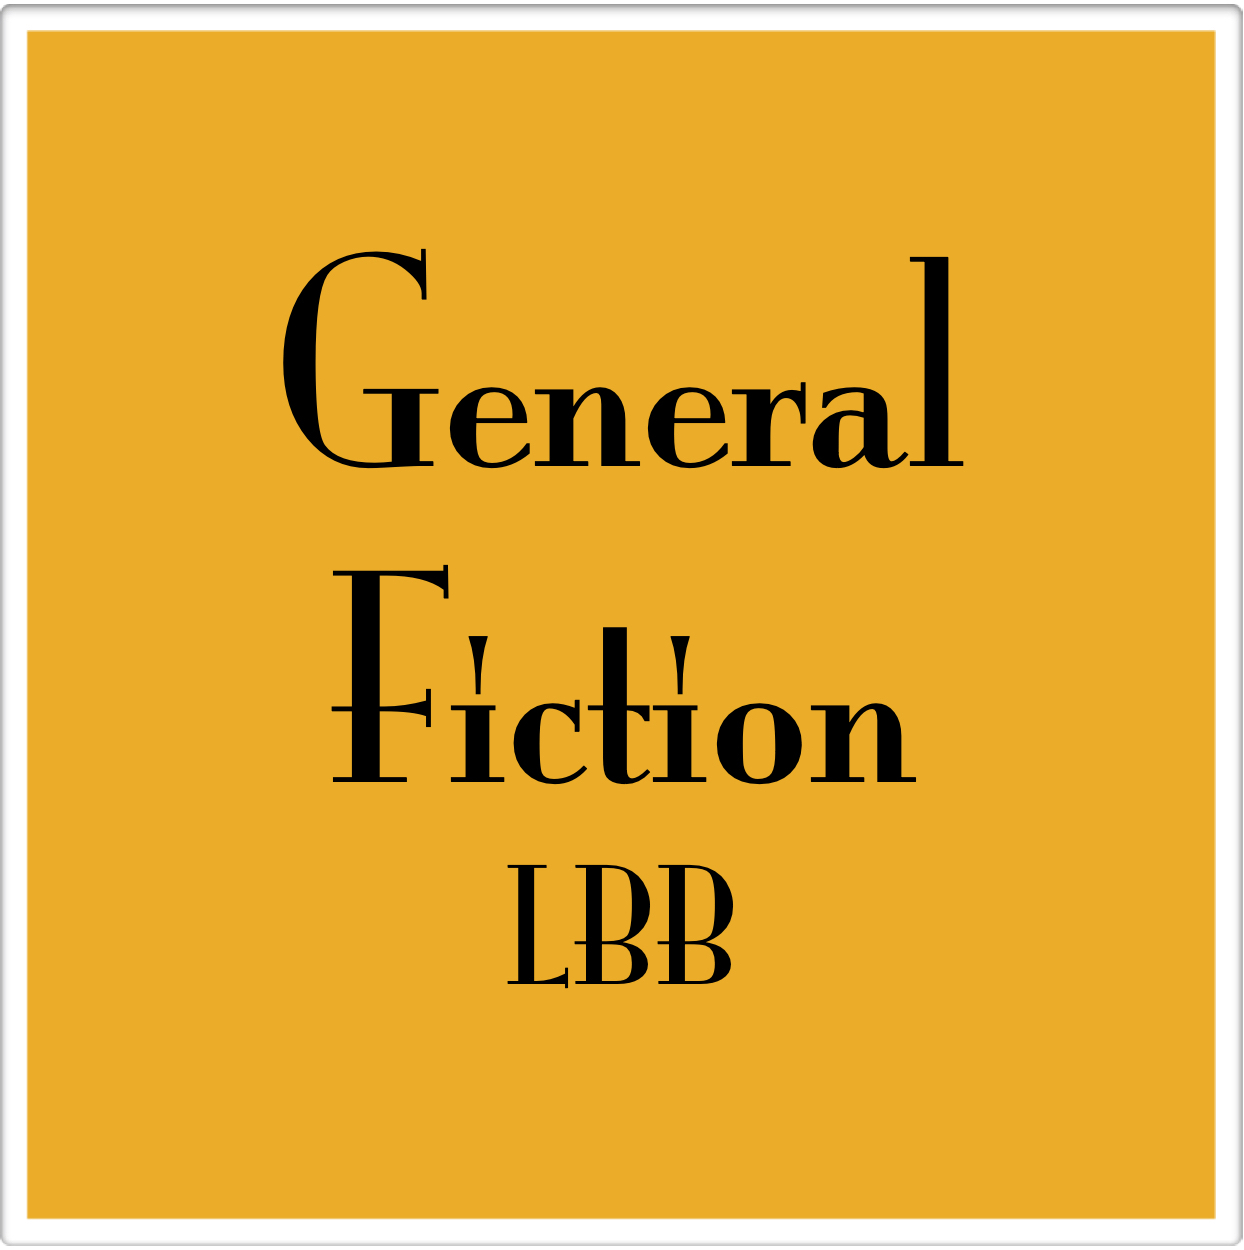 https://leicesterbaybooks.com/general-fiction/